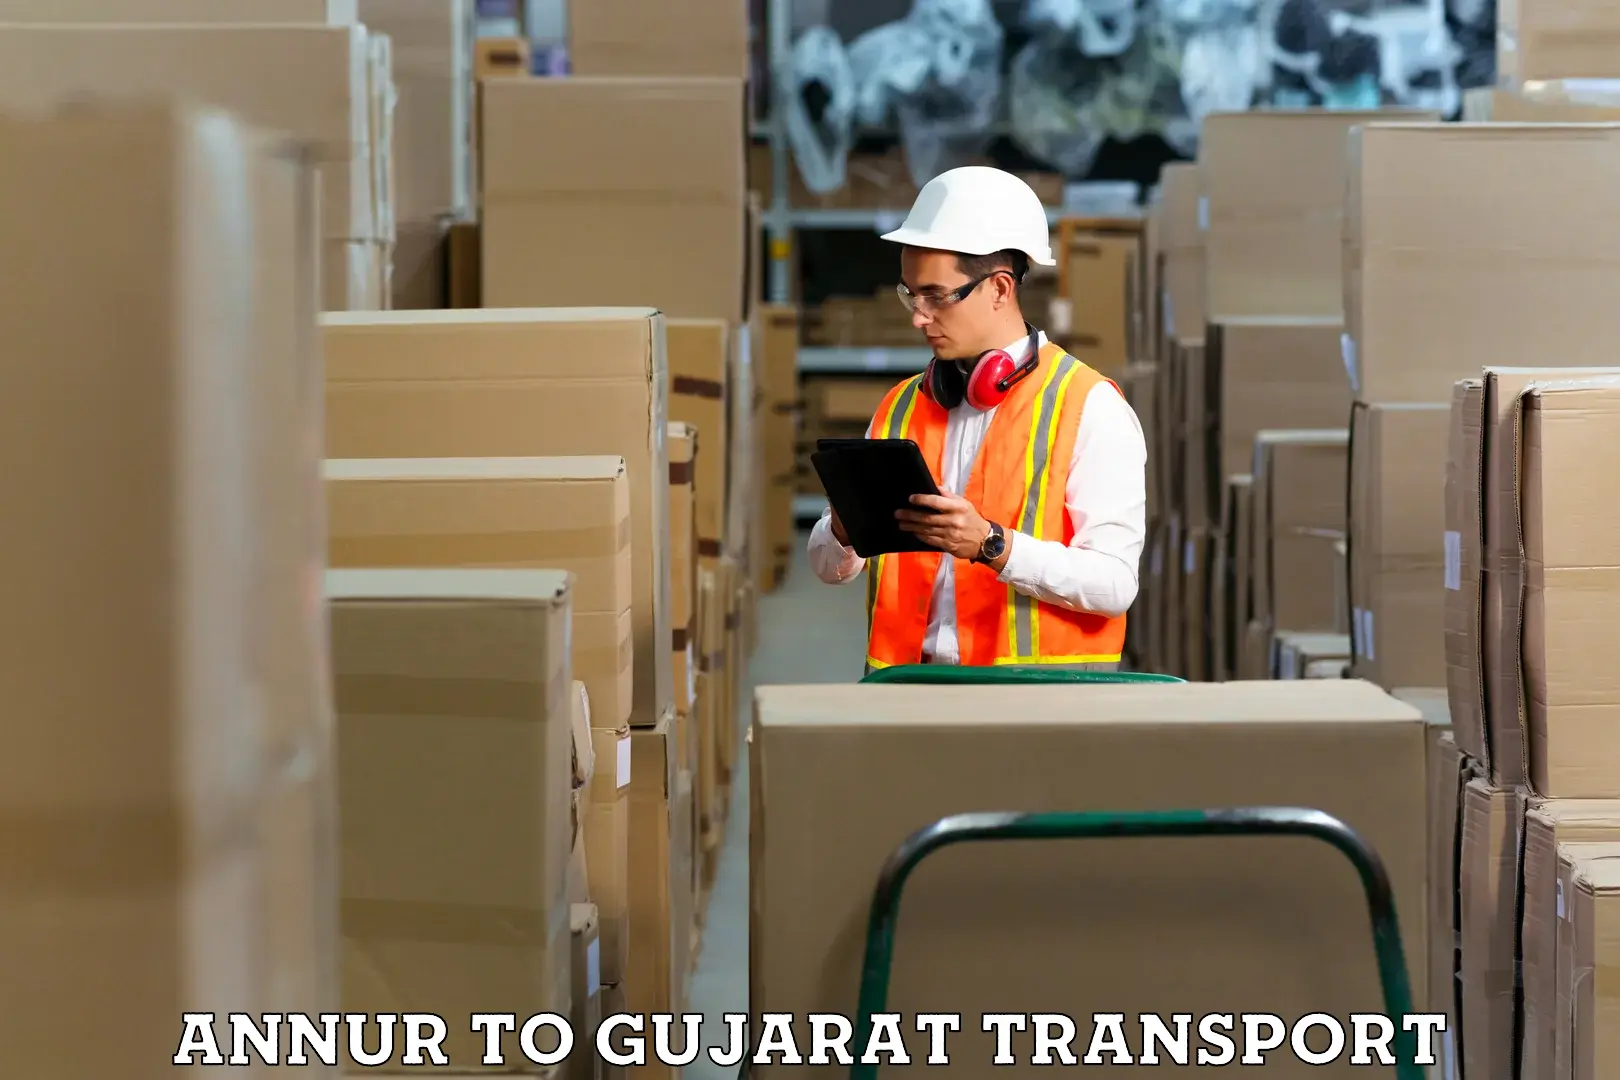 Container transport service Annur to Matar